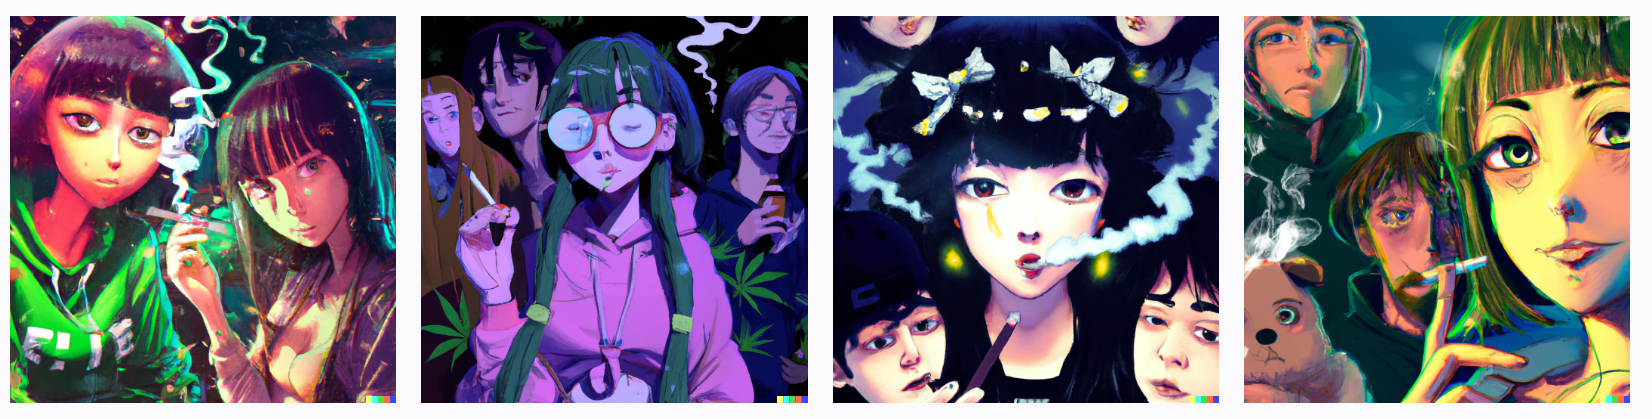 Anime woman smoking weed with some rappers, digital art